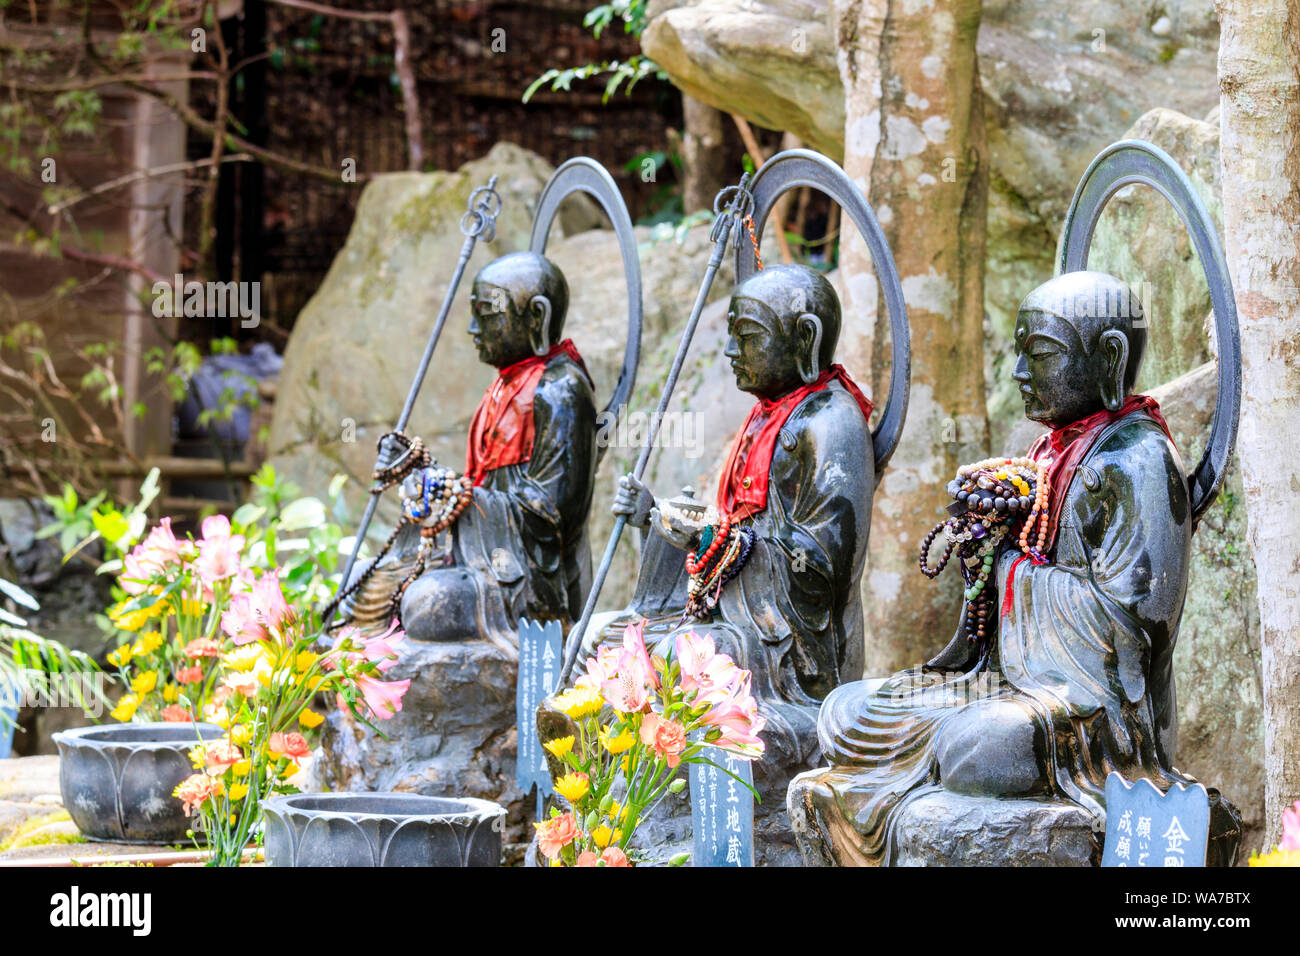 Japan, Miyajima. Daisho-in temple. Line of three Jizo Bosatsu stone statues, two holding scepter, shakujo, and all with red bibs and flowers in front. Stock Photo